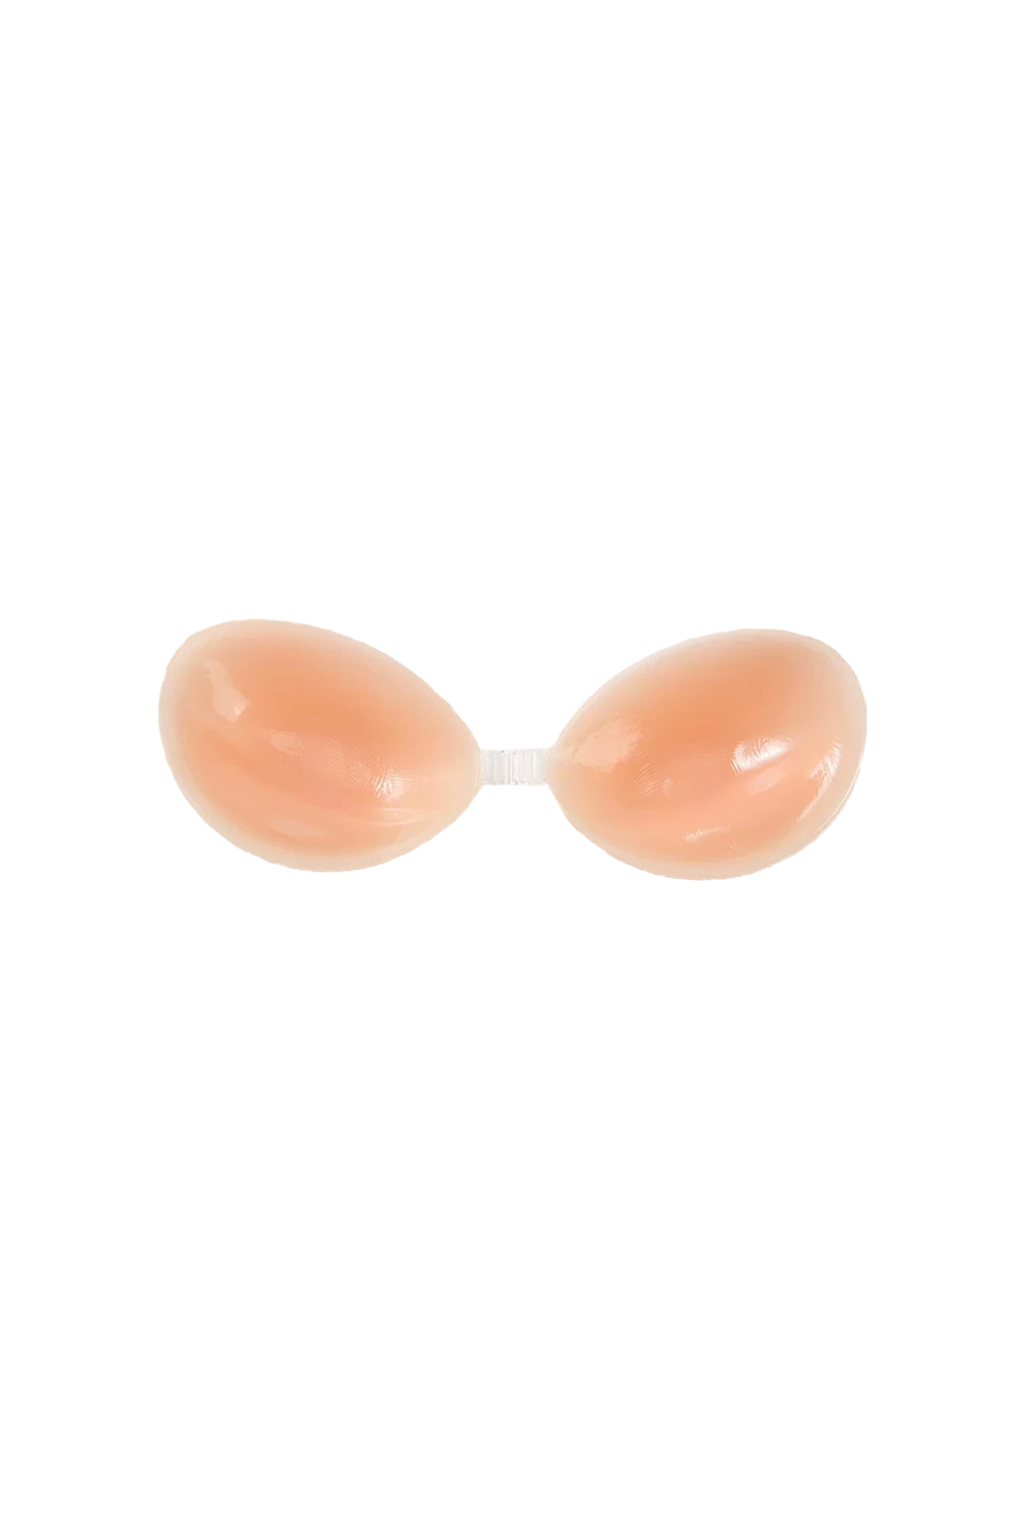 Nude Bra - SWELLY ONLINE STORE